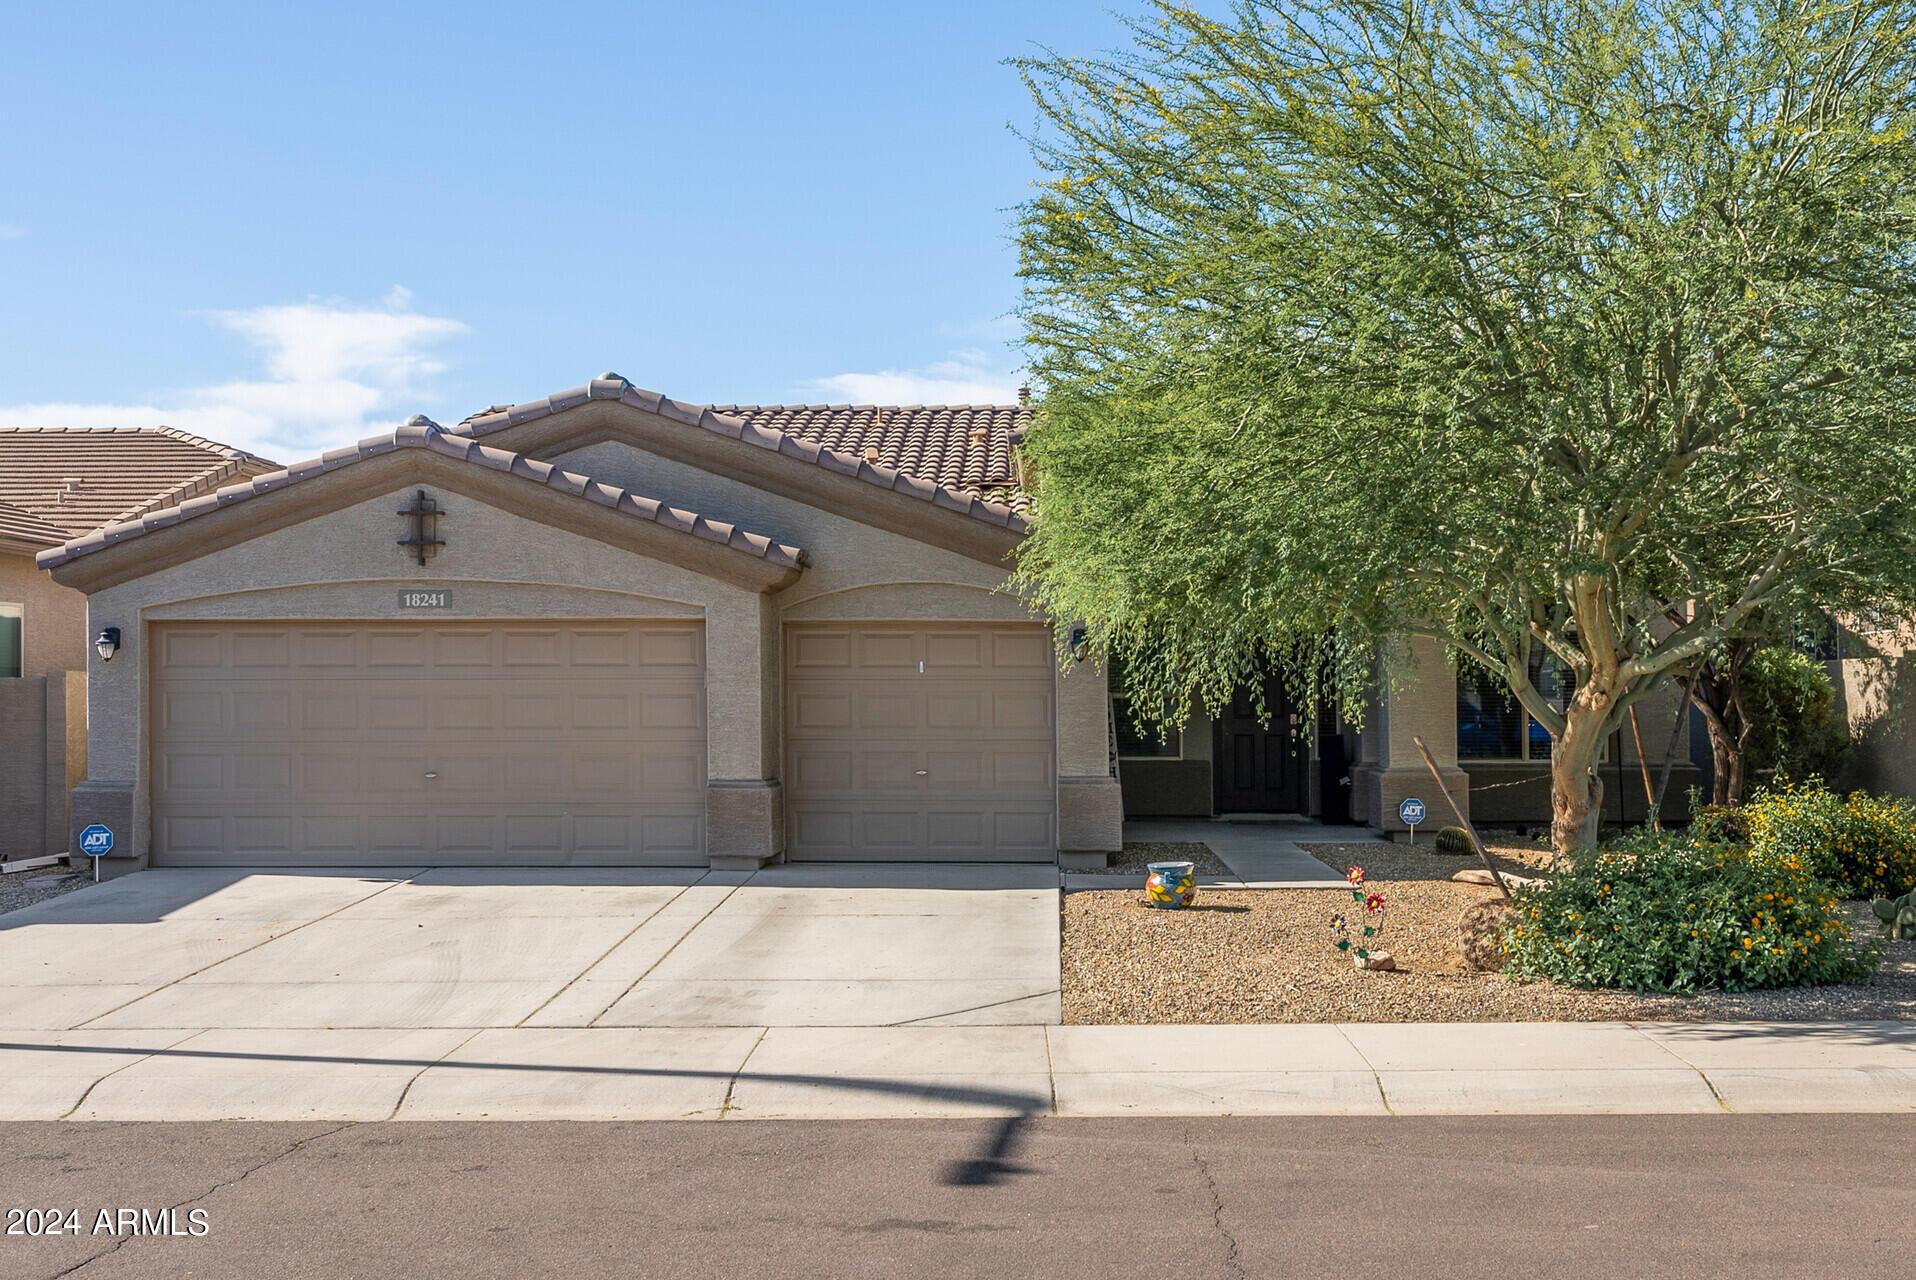 Photo one of 18241 W Young St Surprise AZ 85388 | MLS 6696482